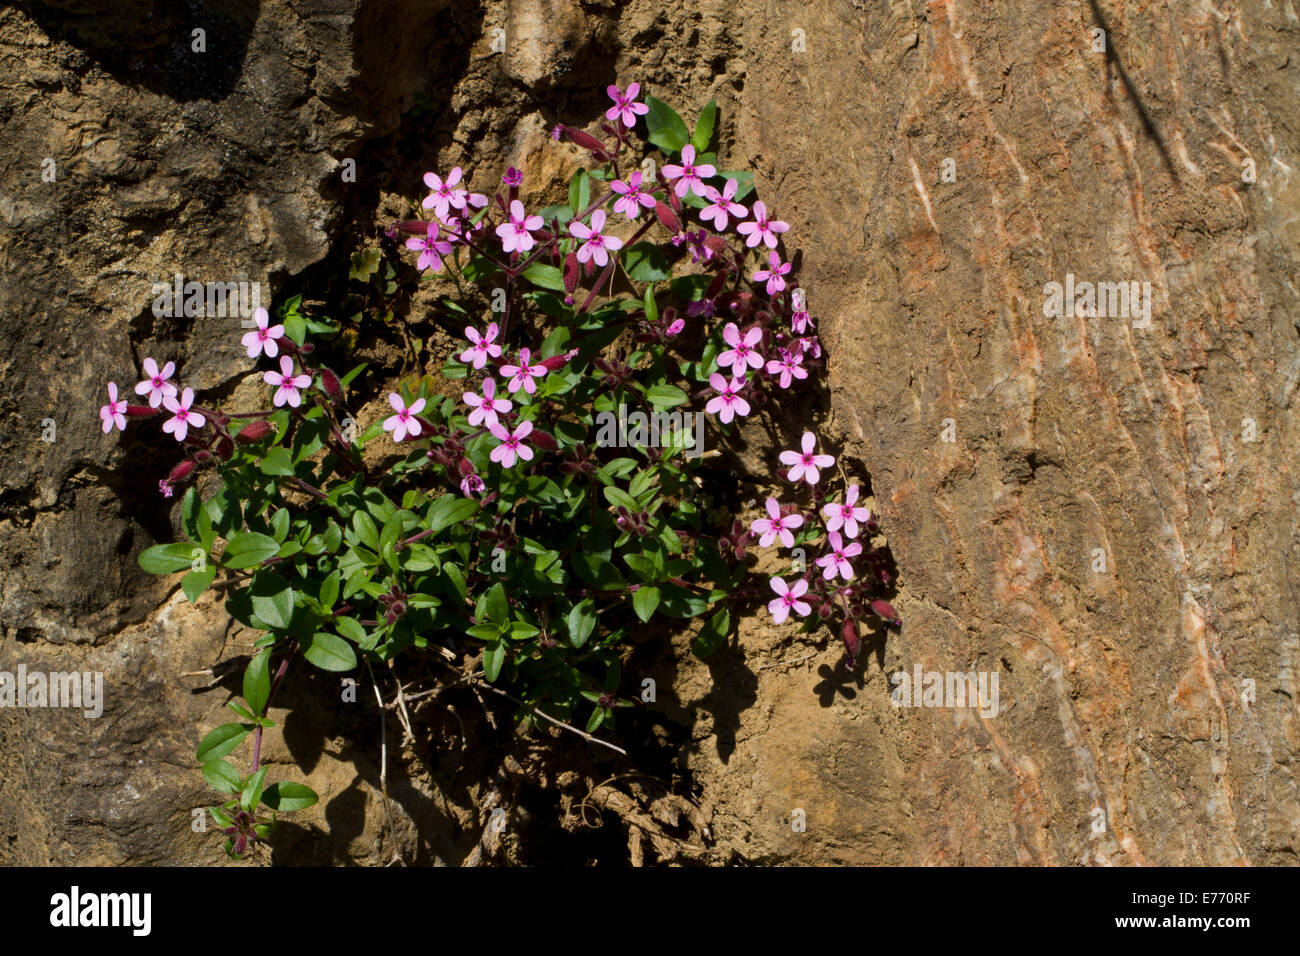 Rock Soapwort (Saponaria ocymoides) flowering on a rock face. Ariege Pyrenees, France. May. Stock Photo